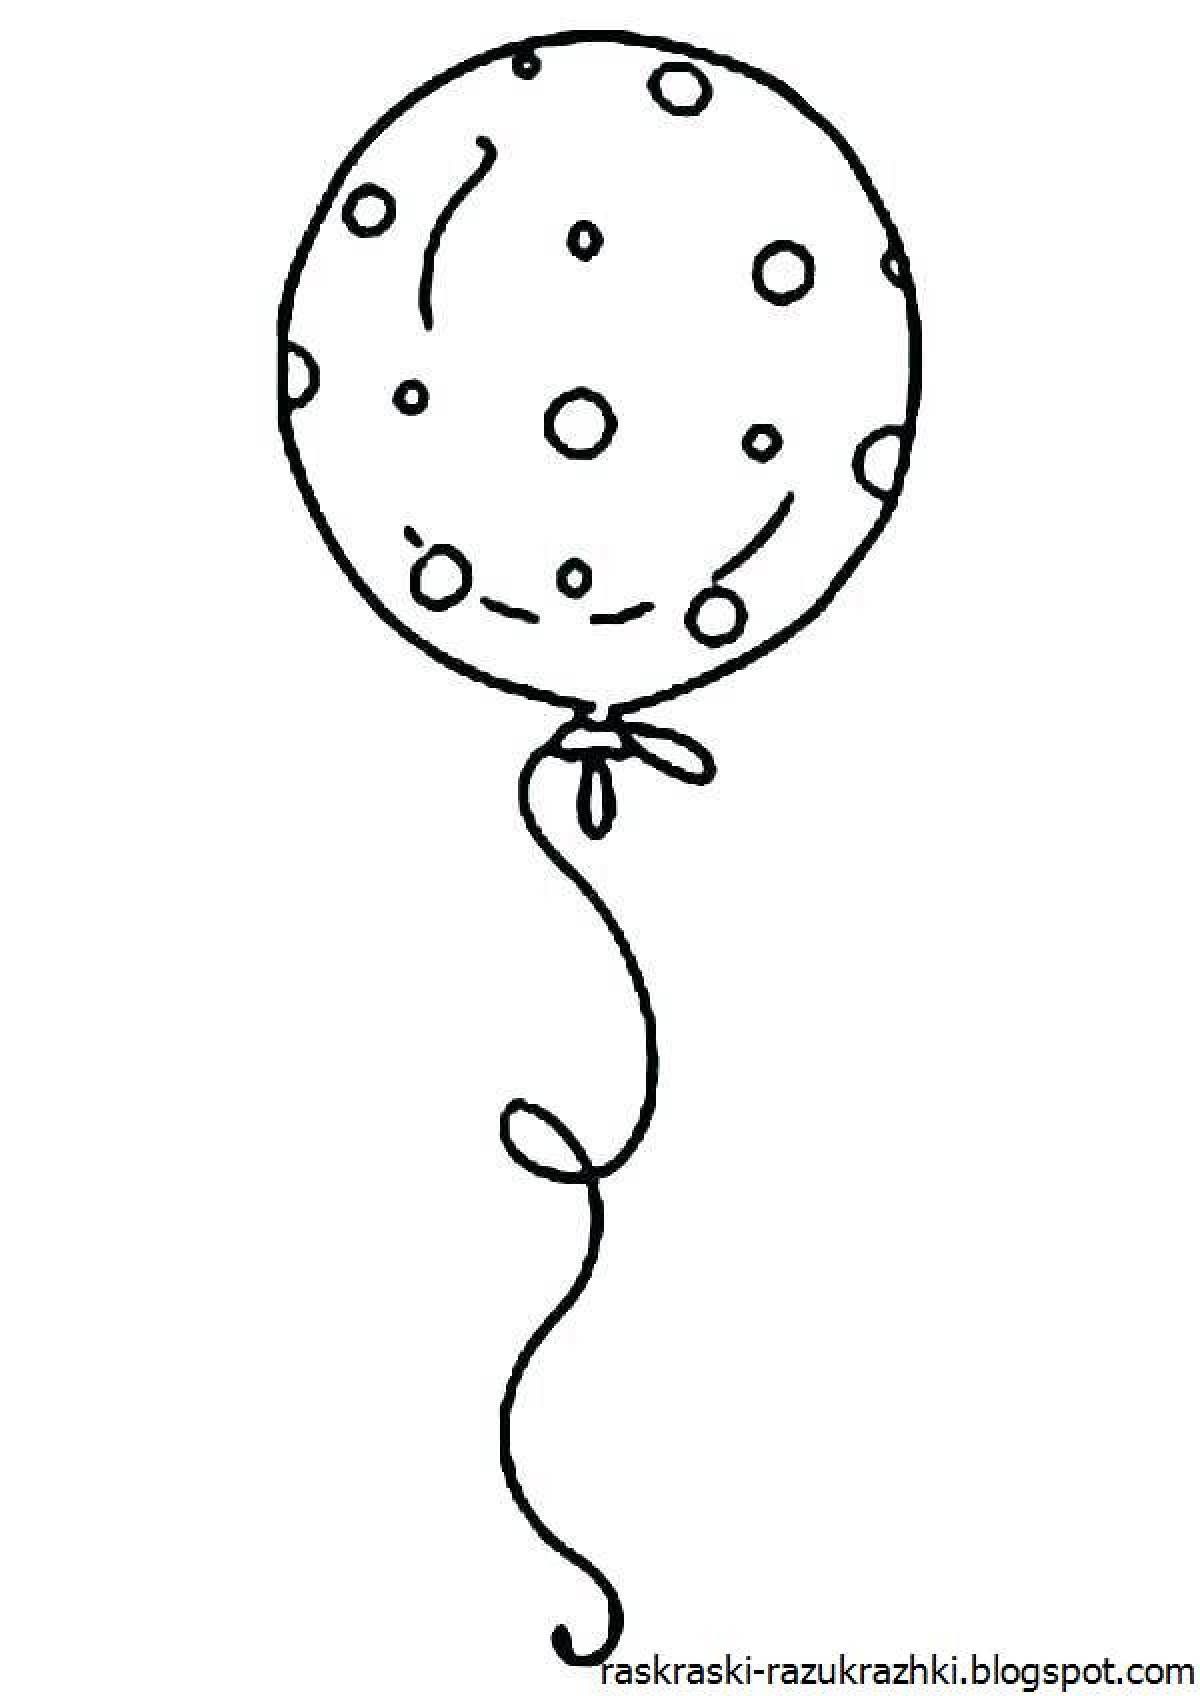 Fluffy ball coloring page